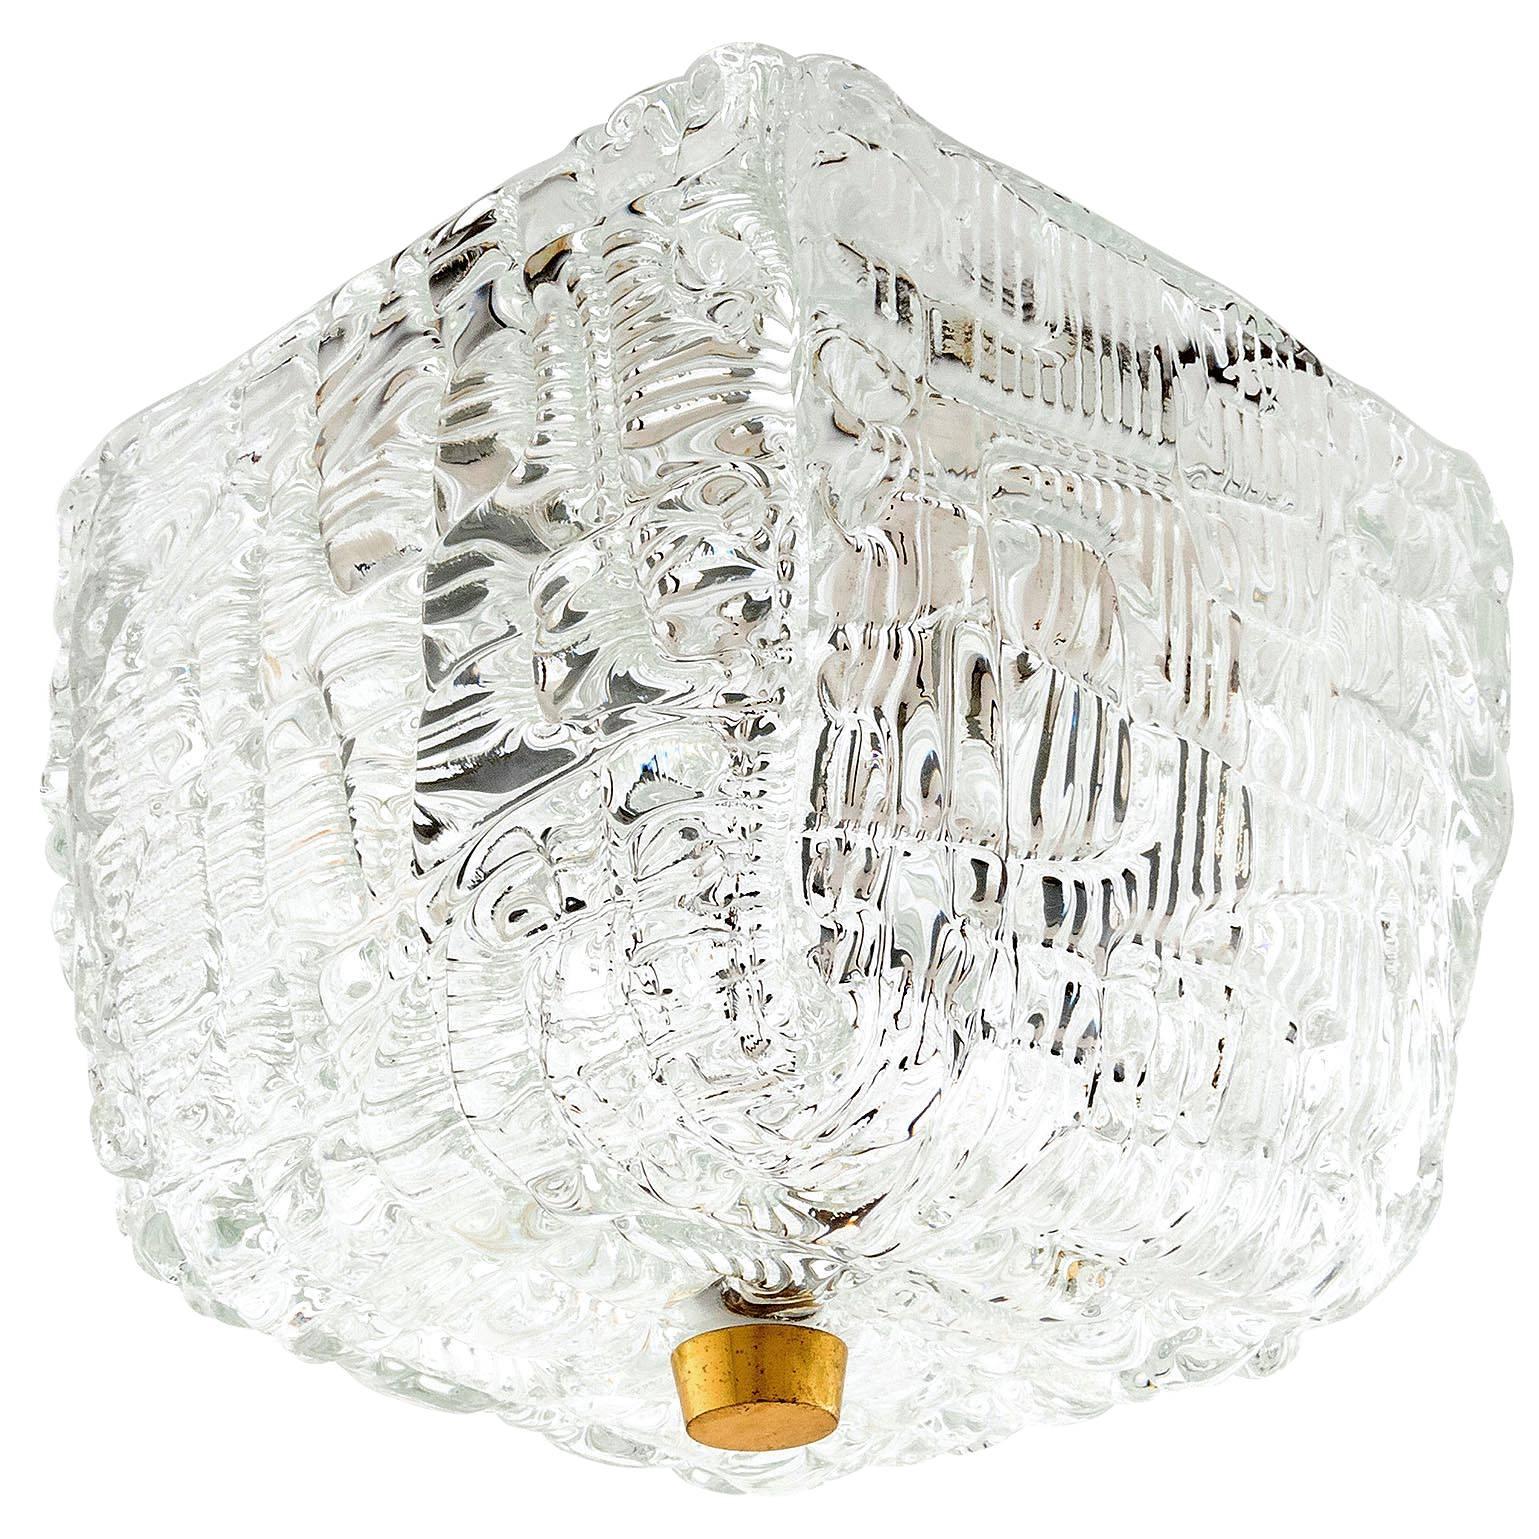 One of six square flushmount light fixtures by Kalmar, Austria, manufactured in midcentury, circa 1960 (late 1960s or early 1970s).
A textured clear glass is mounted with a brass knob to a backplate.
The lamp has two sockets for small screw base